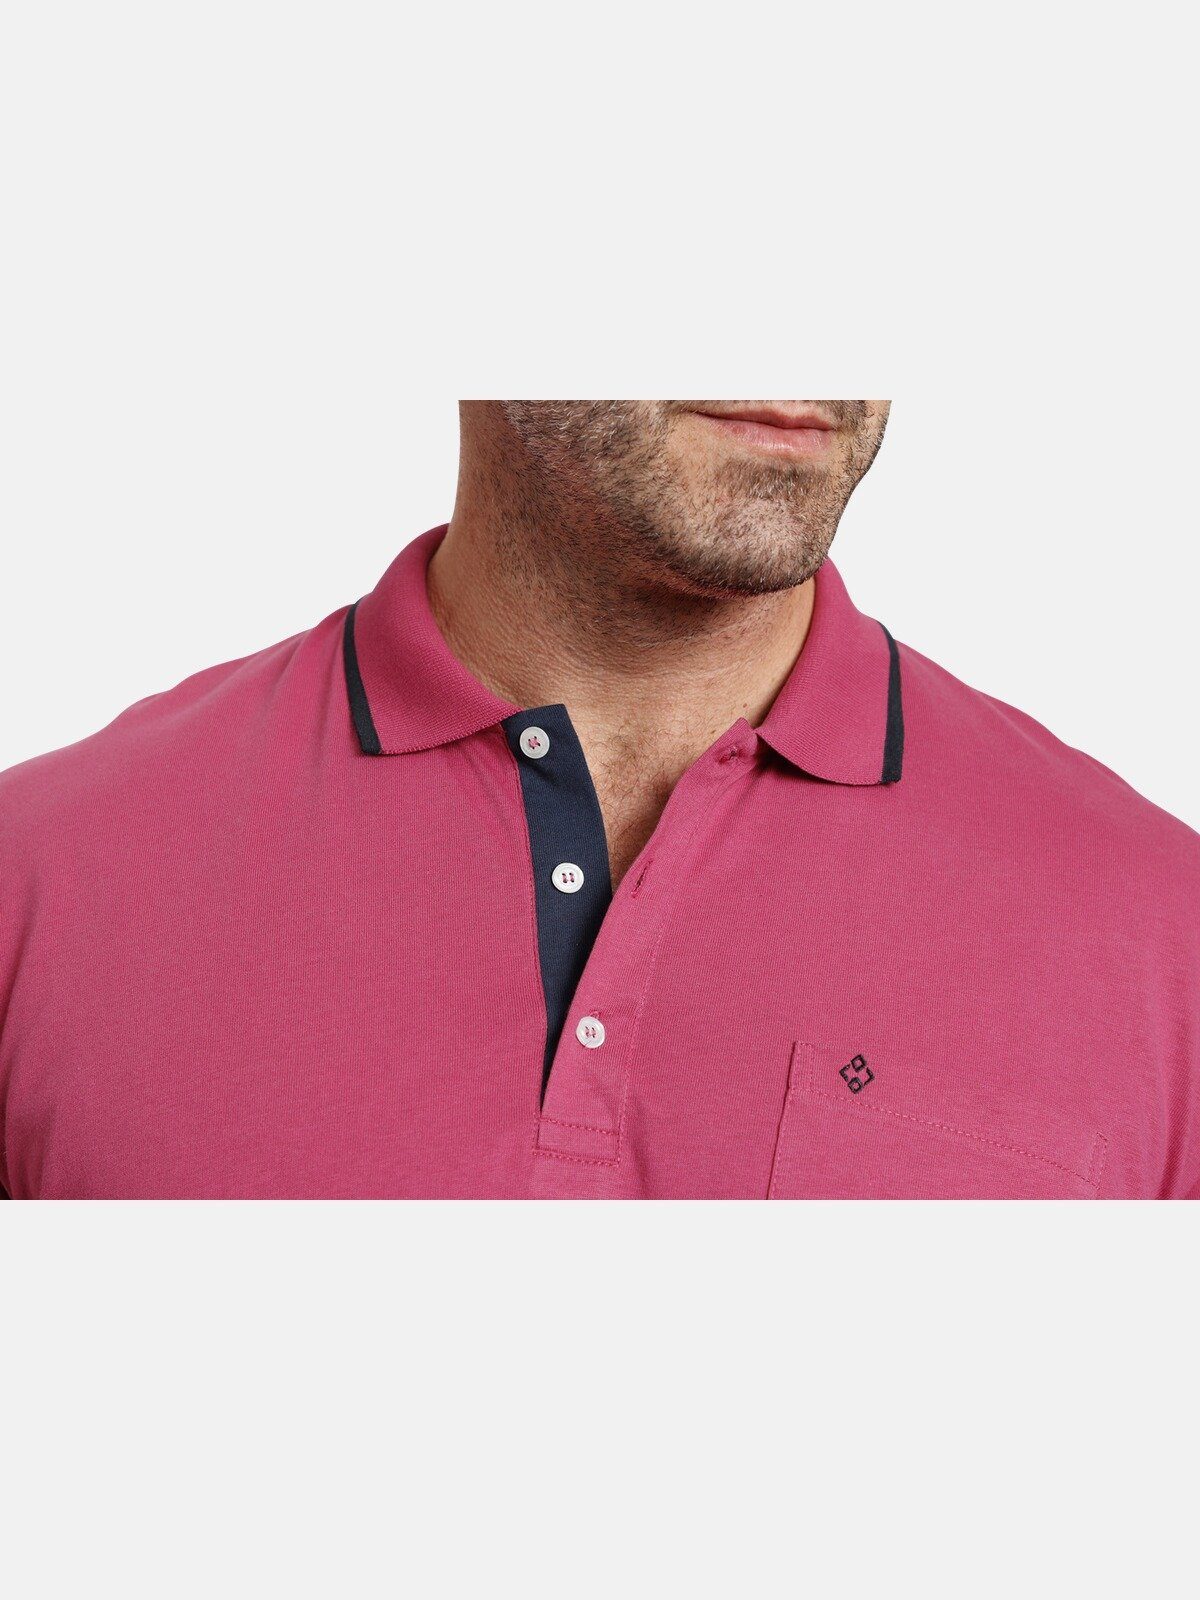 FEN Charles Poloshirt Jersey-Qualität Colby EARL pink bequeme